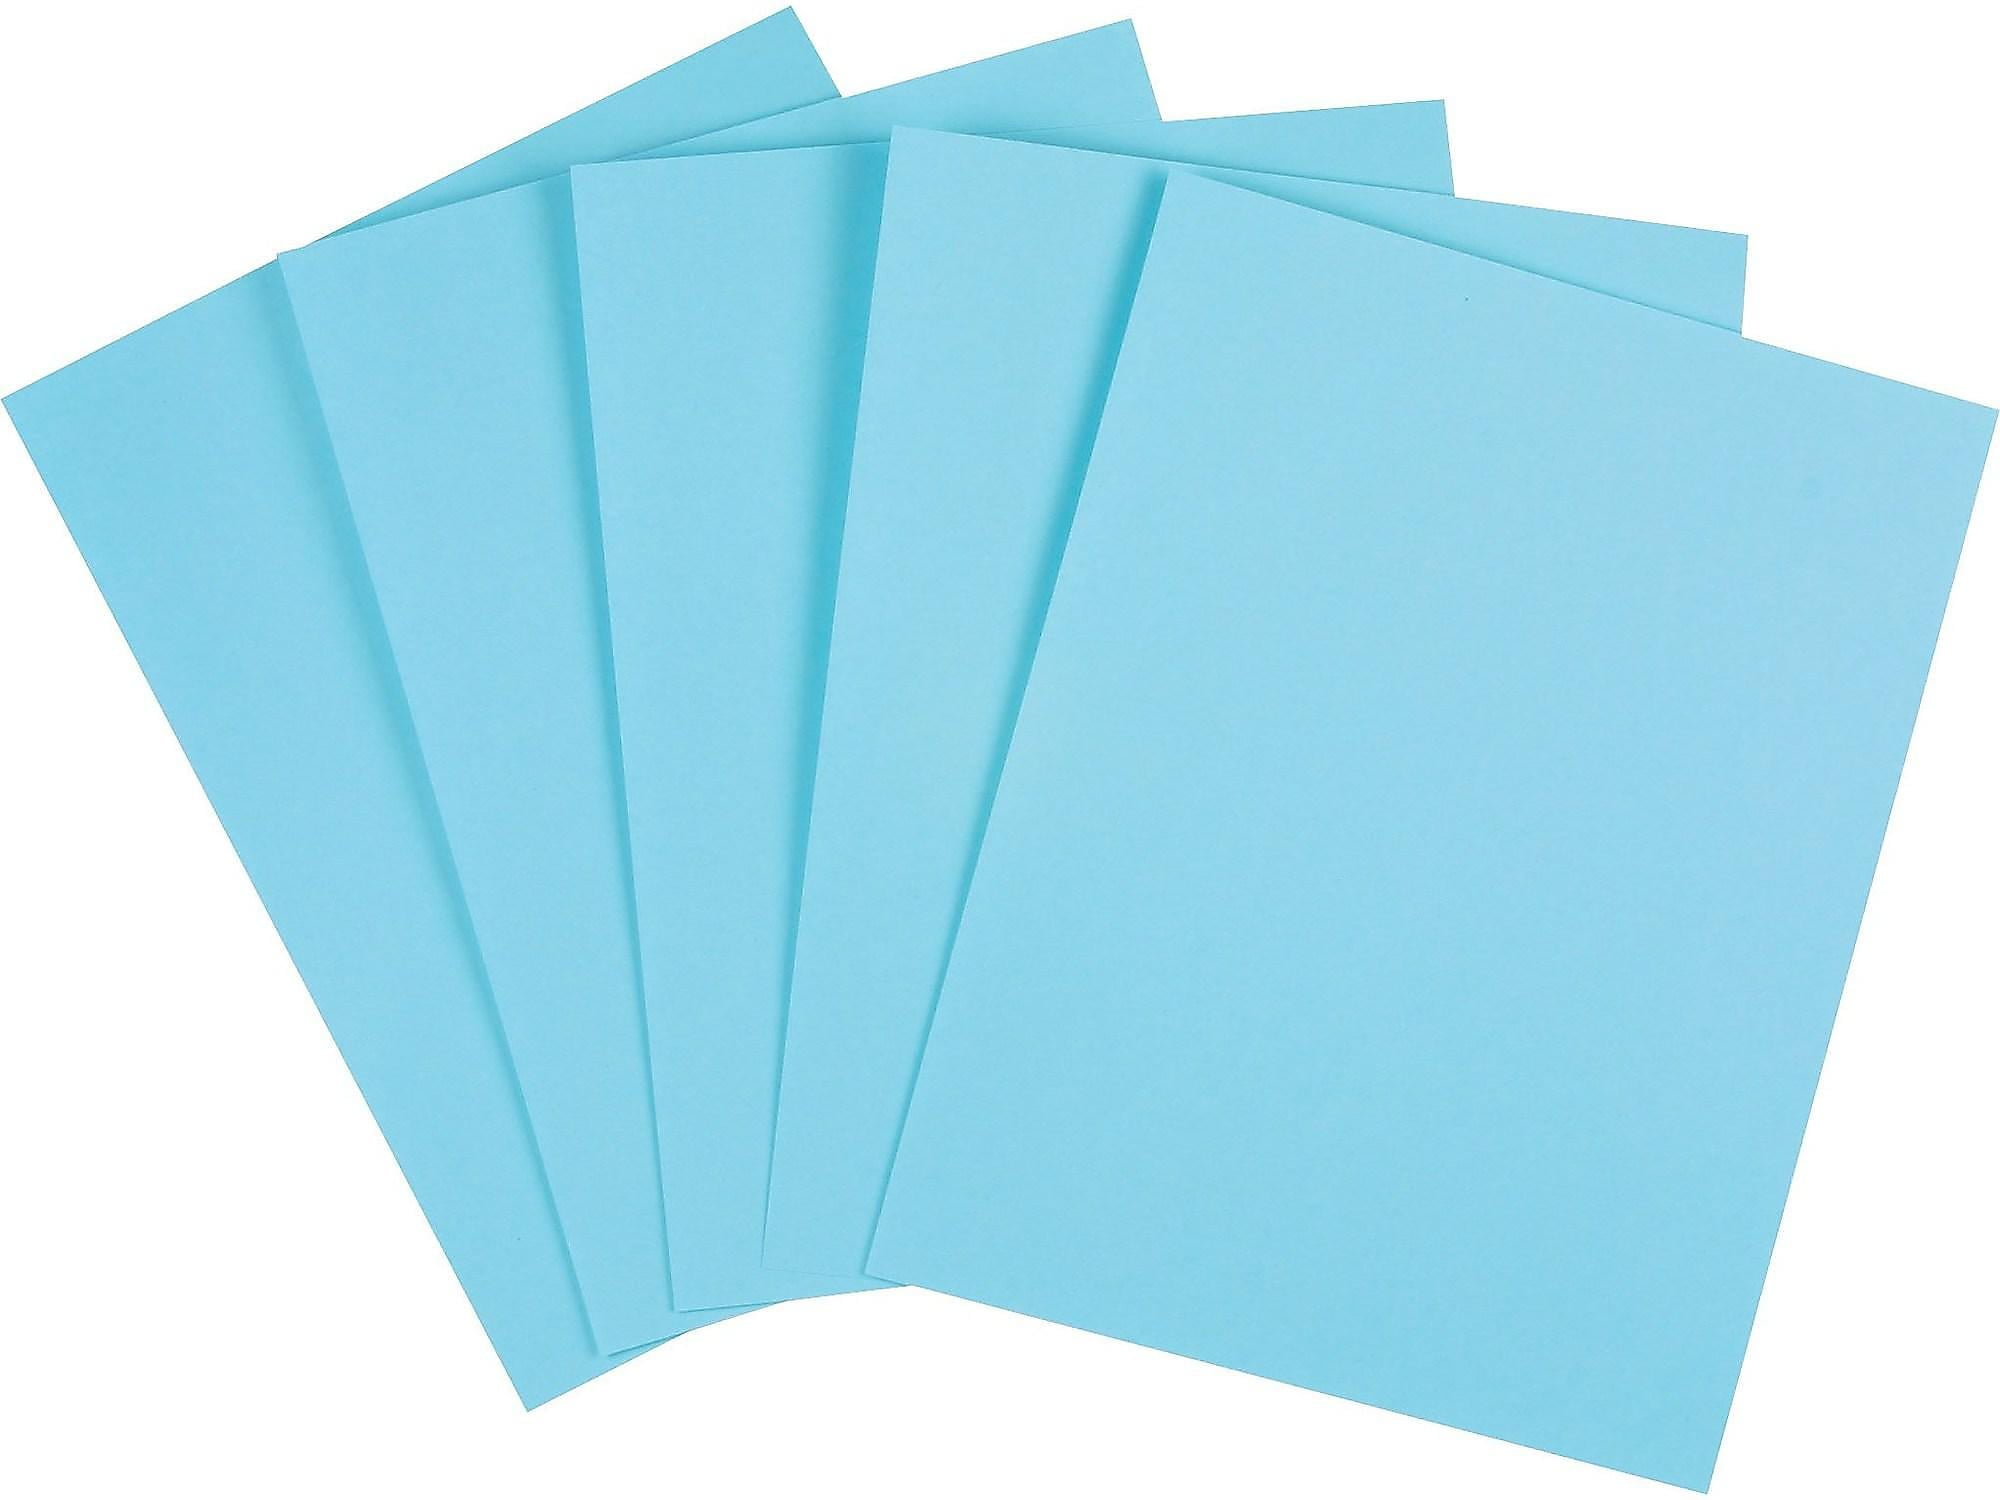 Twavang 25 Sheets Blue Cardstock Paper 8.5'' x 11'', 250gsm/92lb Thick  Paper for Scrapbook, Invitations, Printing and DIY Cards